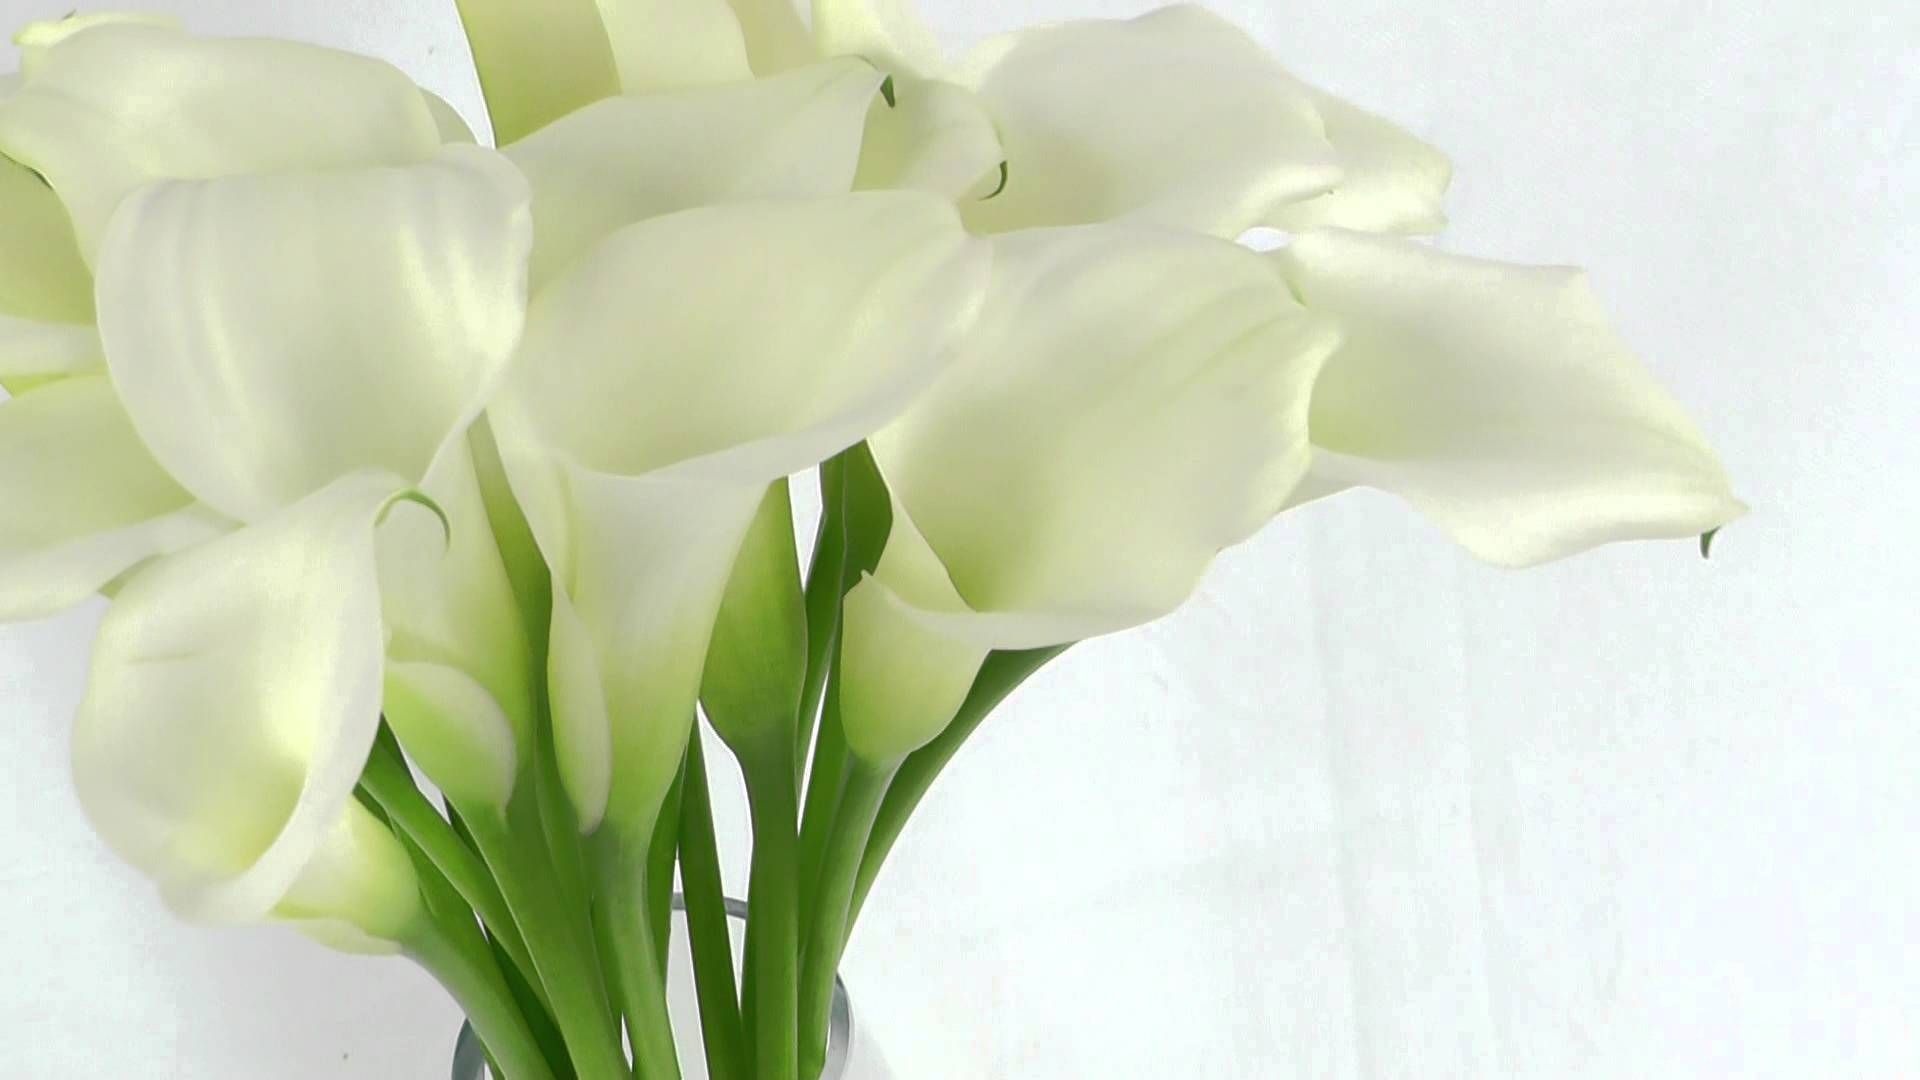 Calla Lily: Grown both as ornamental plants and for cut flowers. 1920x1080 Full HD Background.